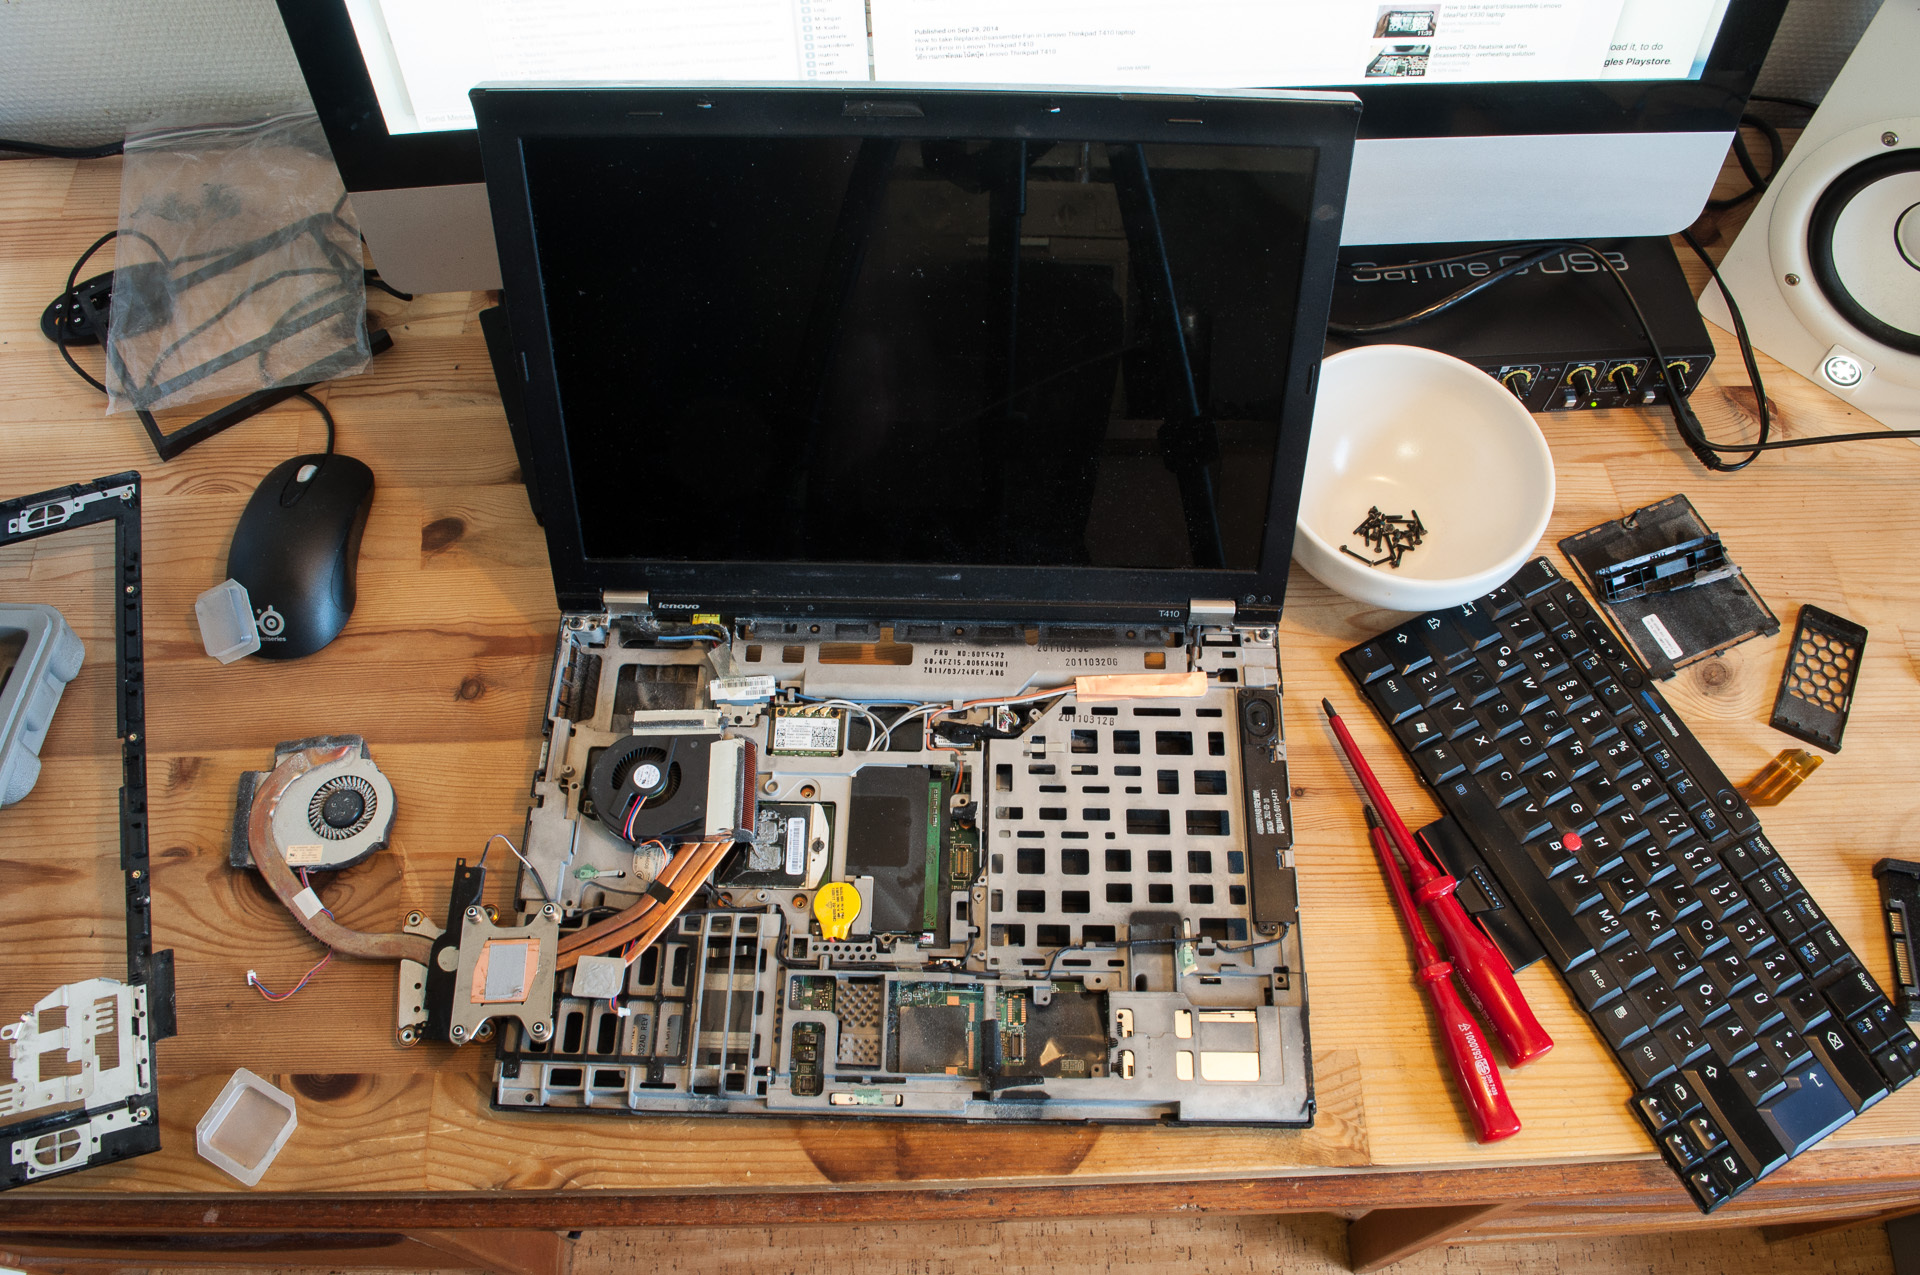 Open ThinkPad during repairation